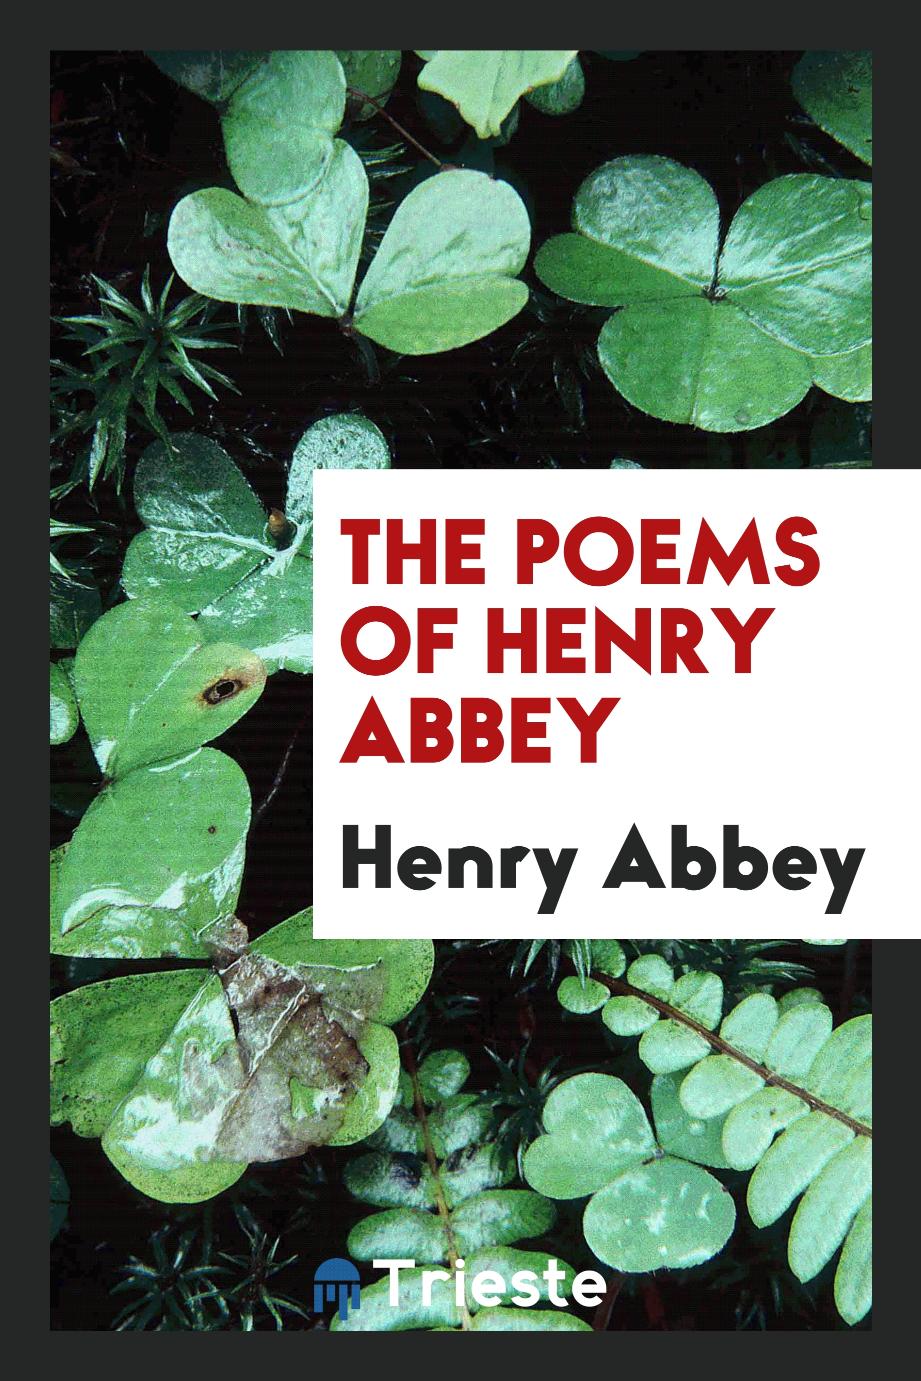 The poems of Henry Abbey